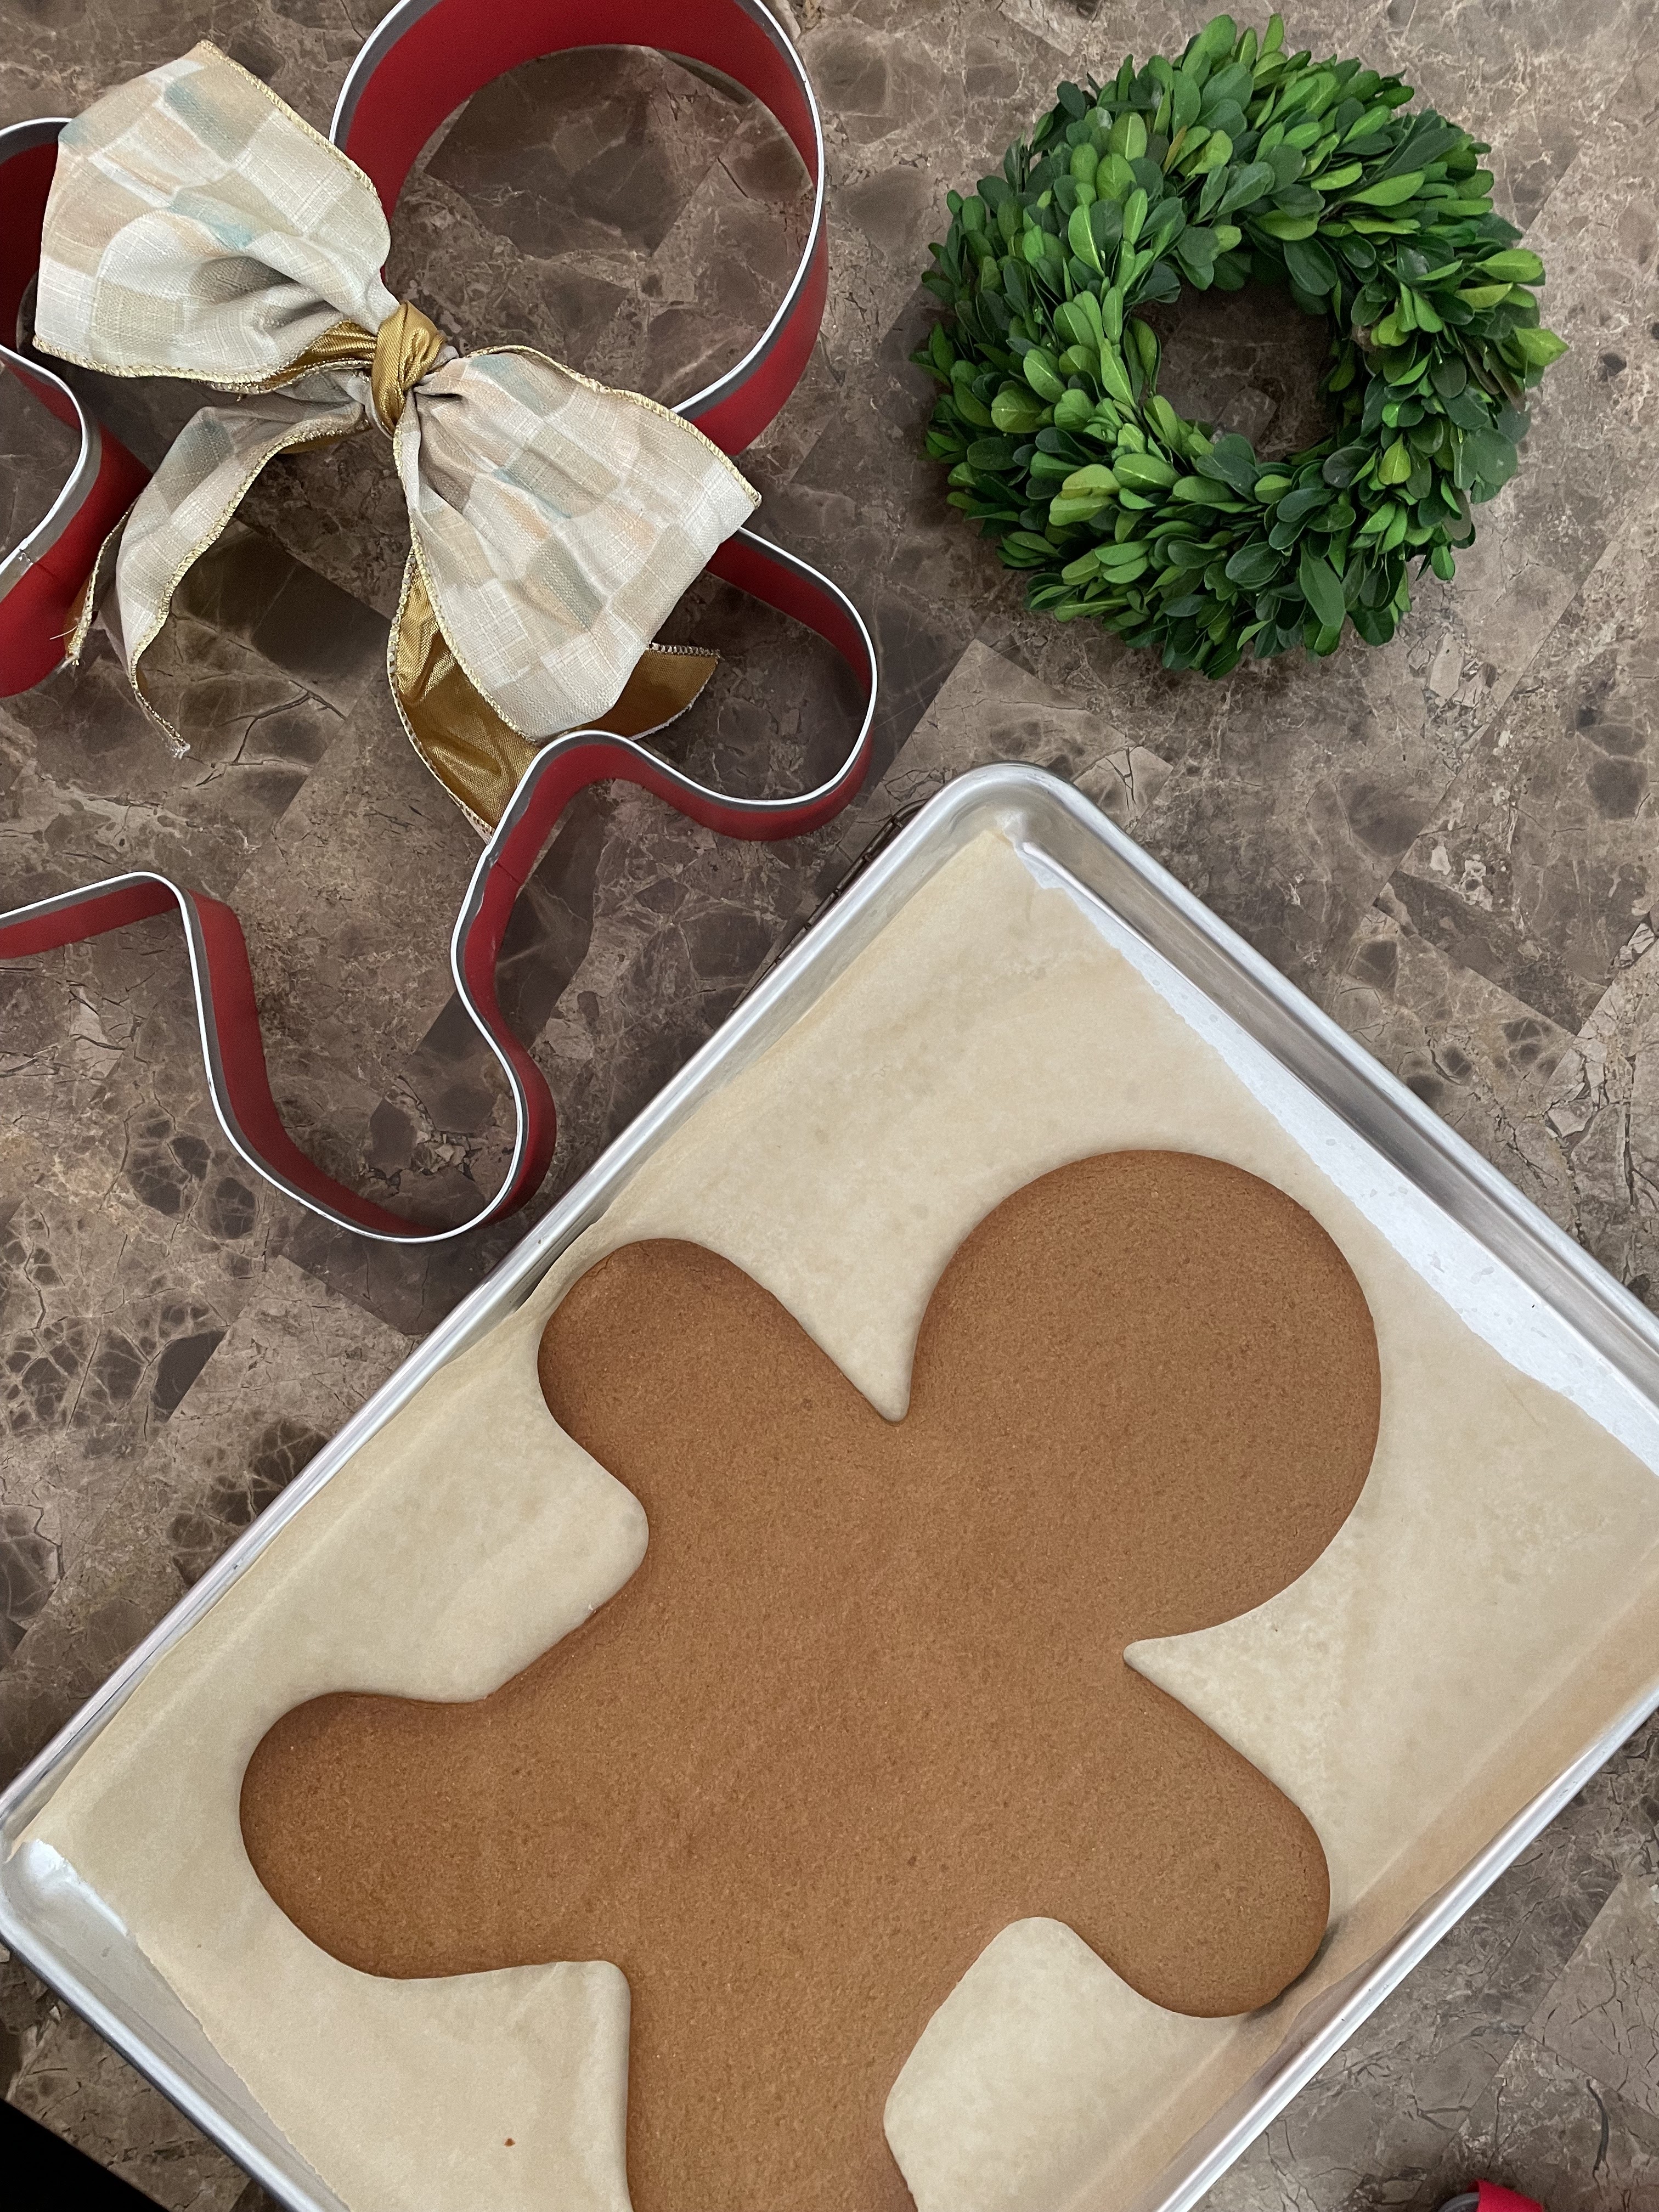 Christmas Gift Tags Cookie Cutter Set – Confection Couture Stencils